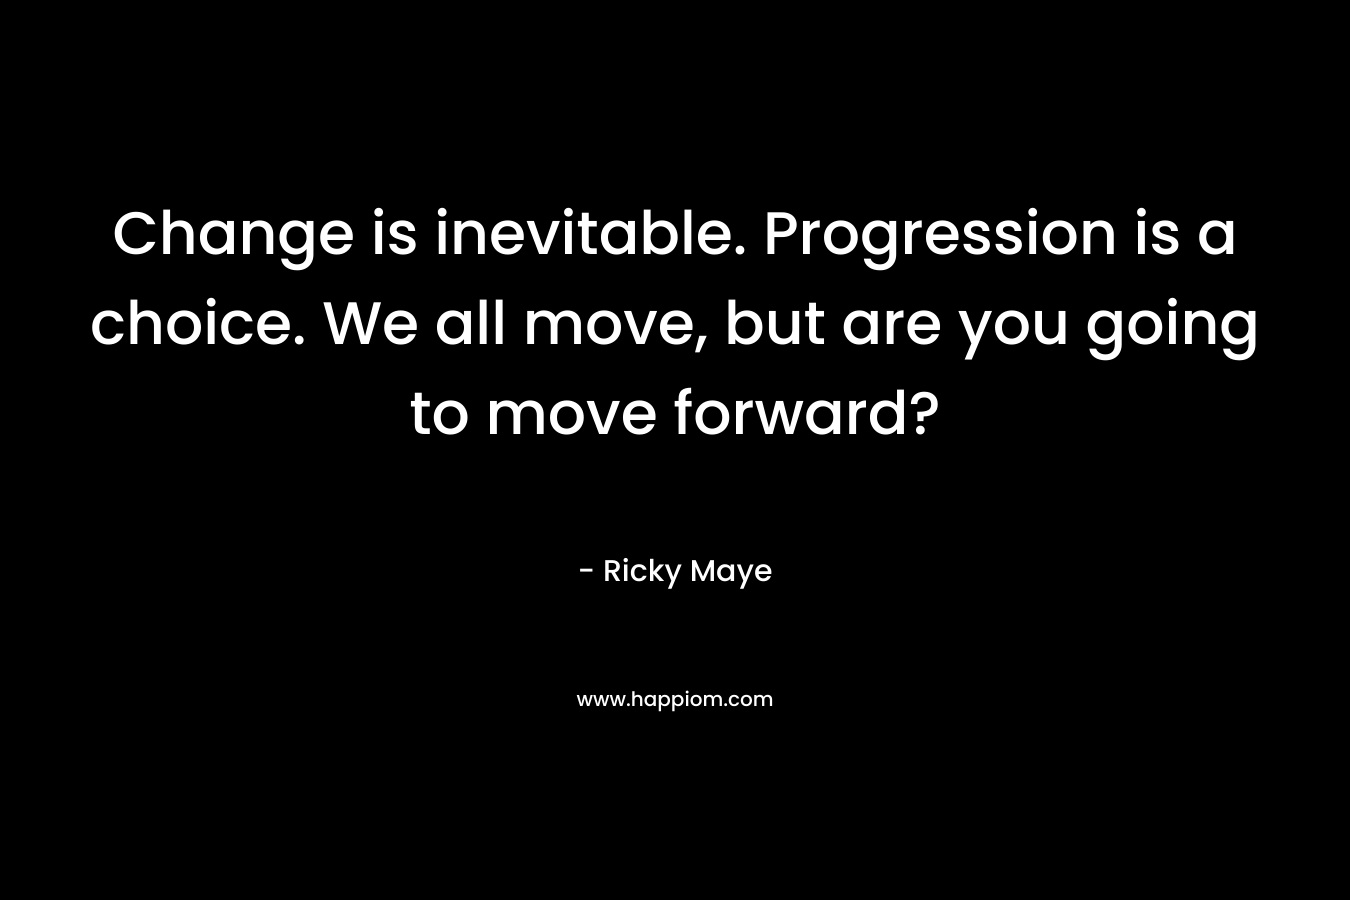 Change is inevitable. Progression is a choice. We all move, but are you going to move forward?